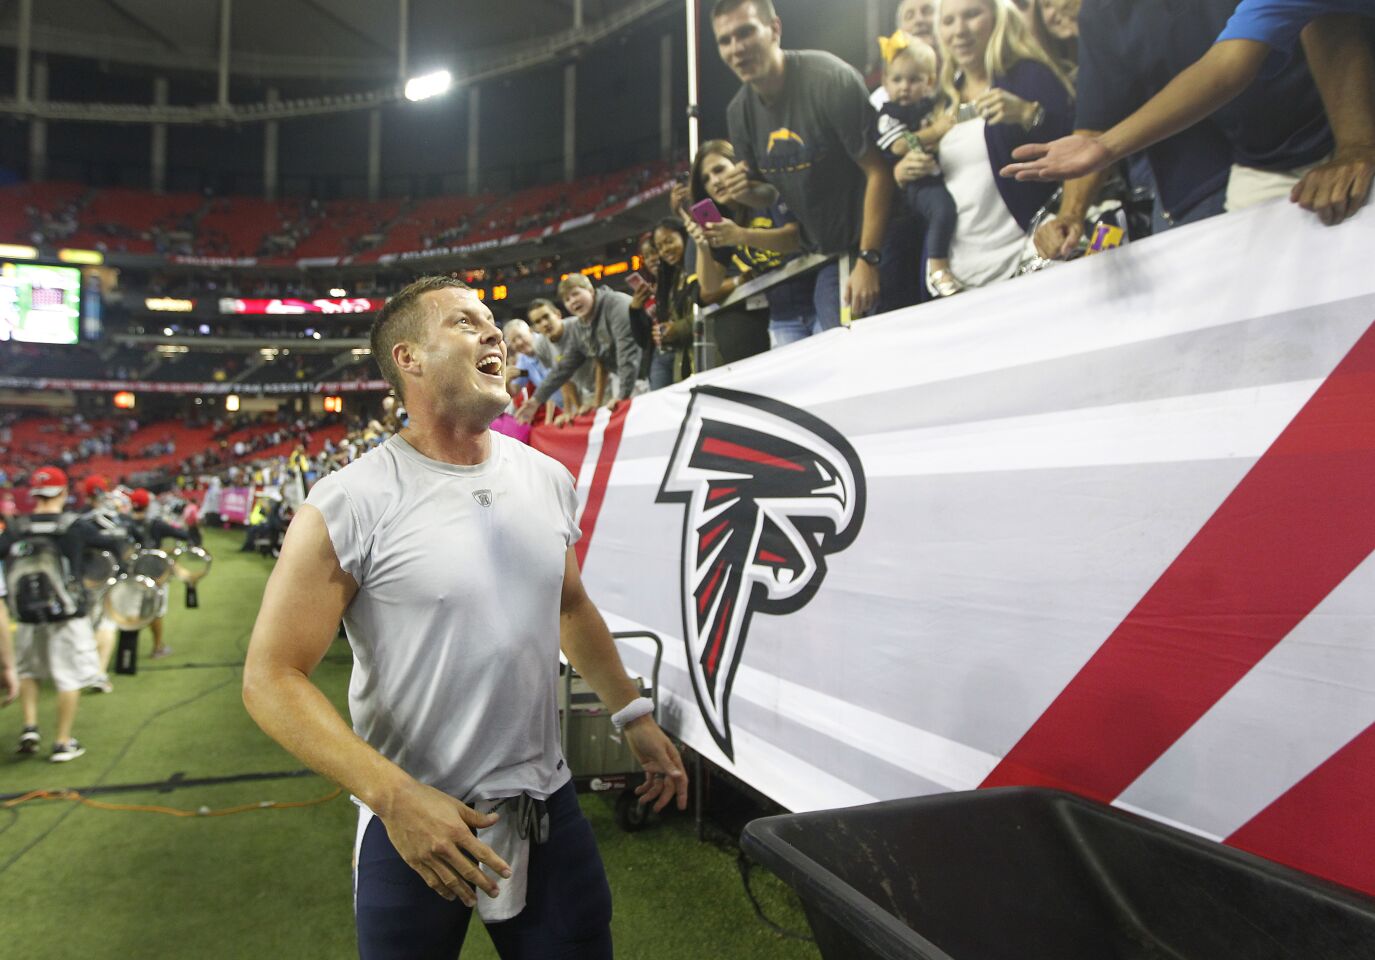 San Diego Chargers Philip Rivers celebrates with fans after a 33-30 overtime victory against the Falcons in Atlanta on Sunday, Oct. 23, 2016. Photo by K.C. Alfred/The San Diego Union-Tribune